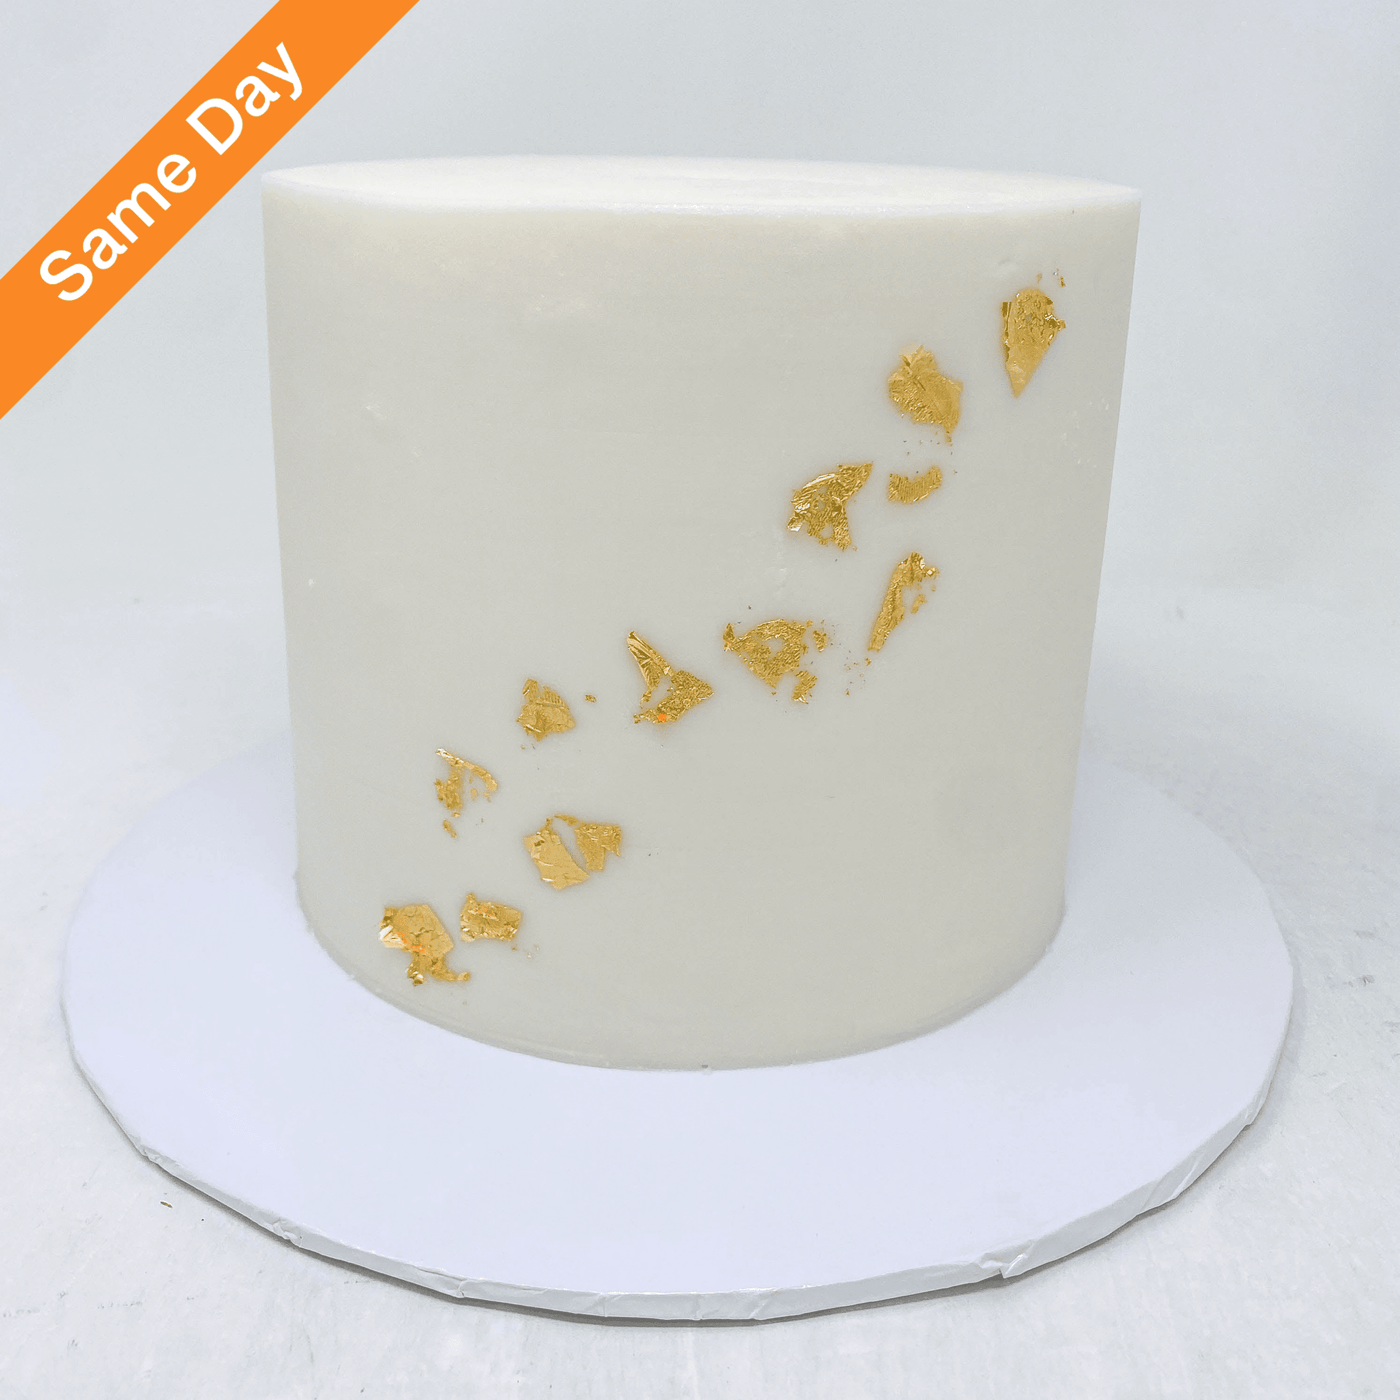 Plain Buttercream Cake with Gold Flakes (Same Day)